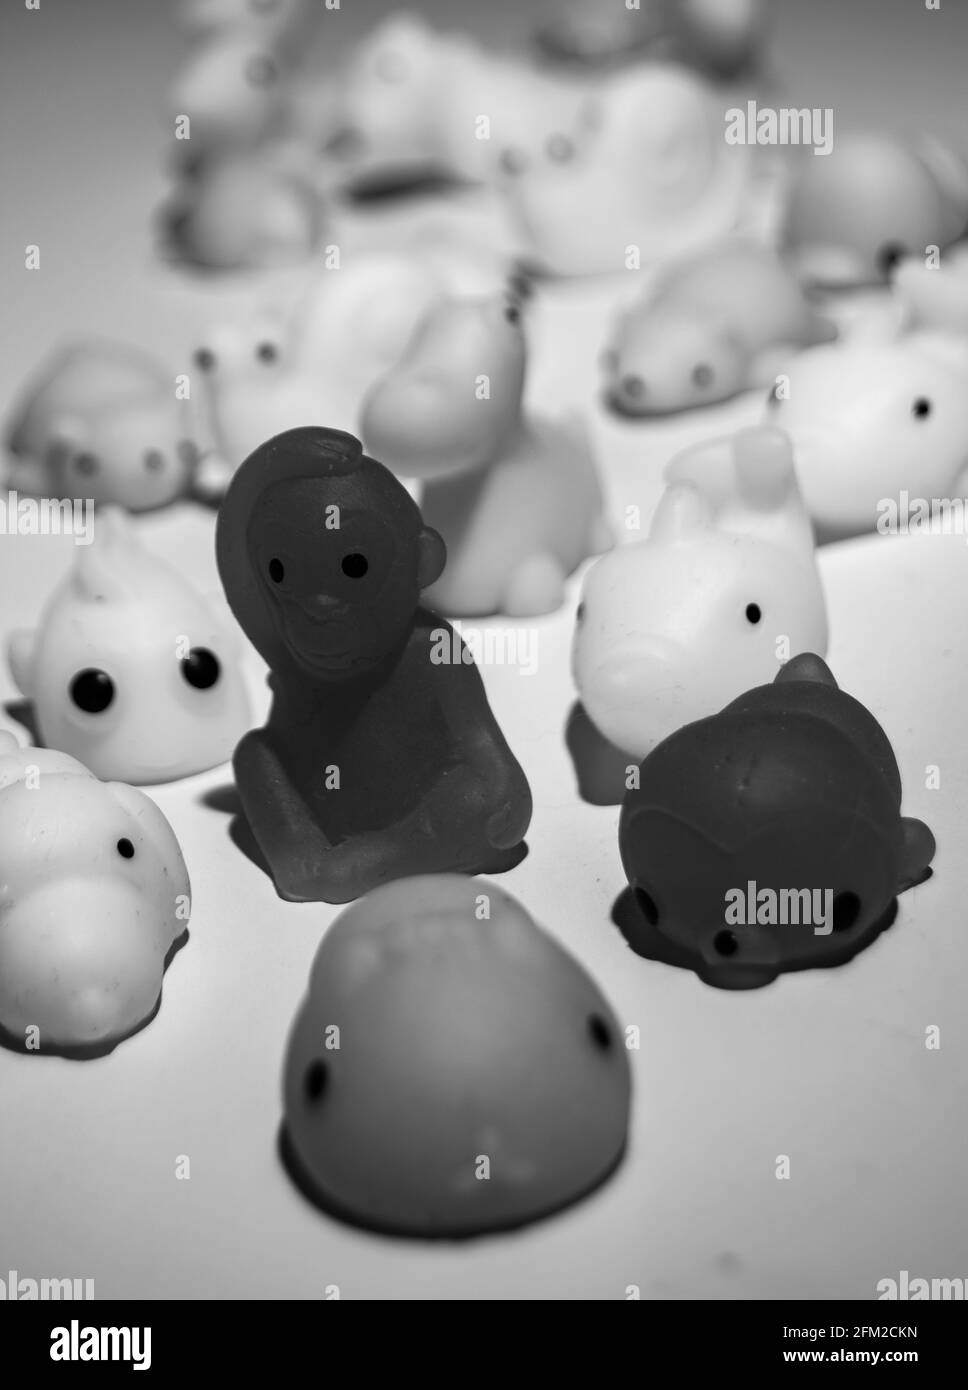 Black and white racism or be different photo concept of small animals, squishies Stock Photo